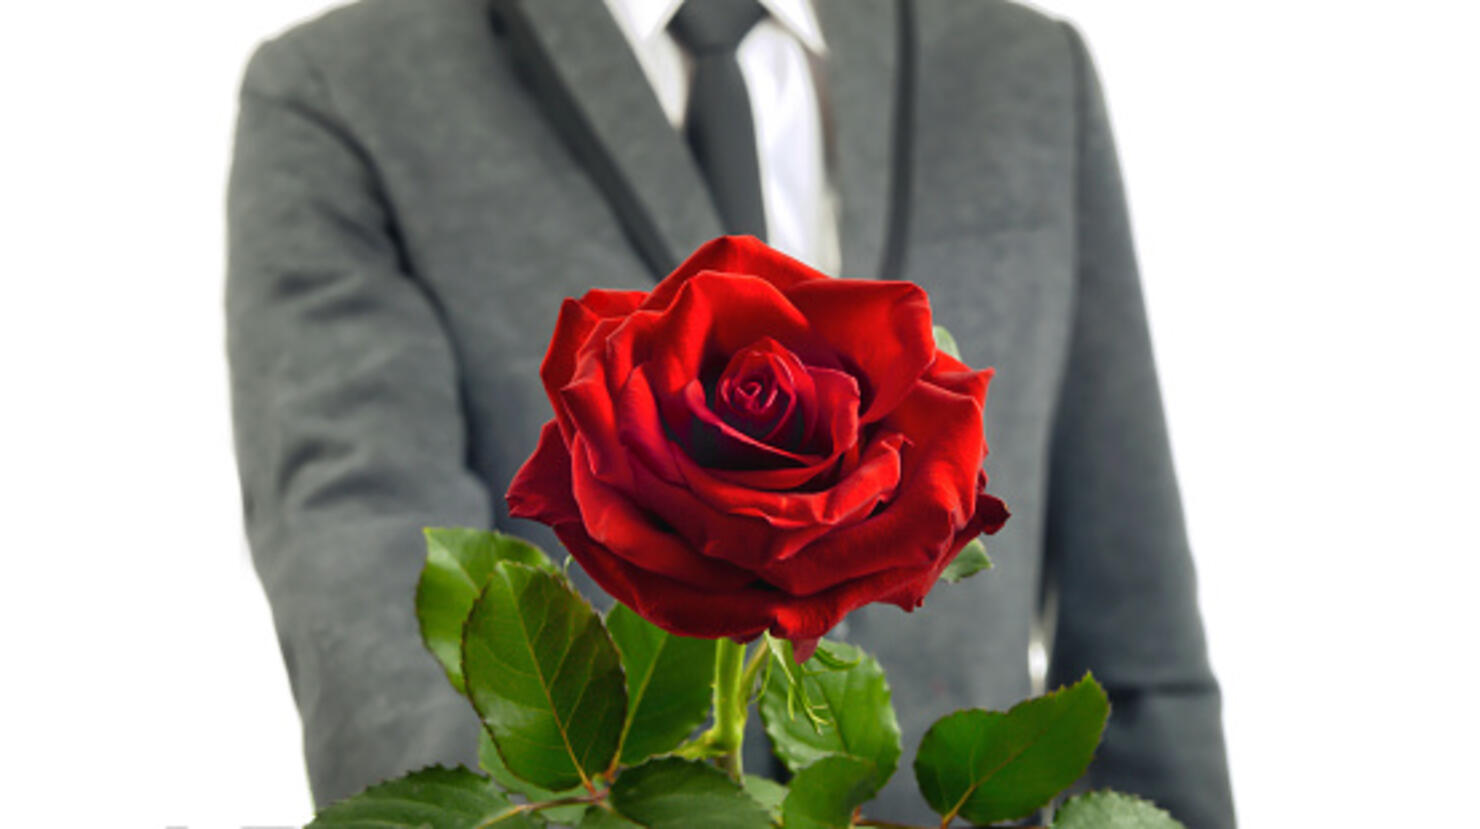 Man give red rose